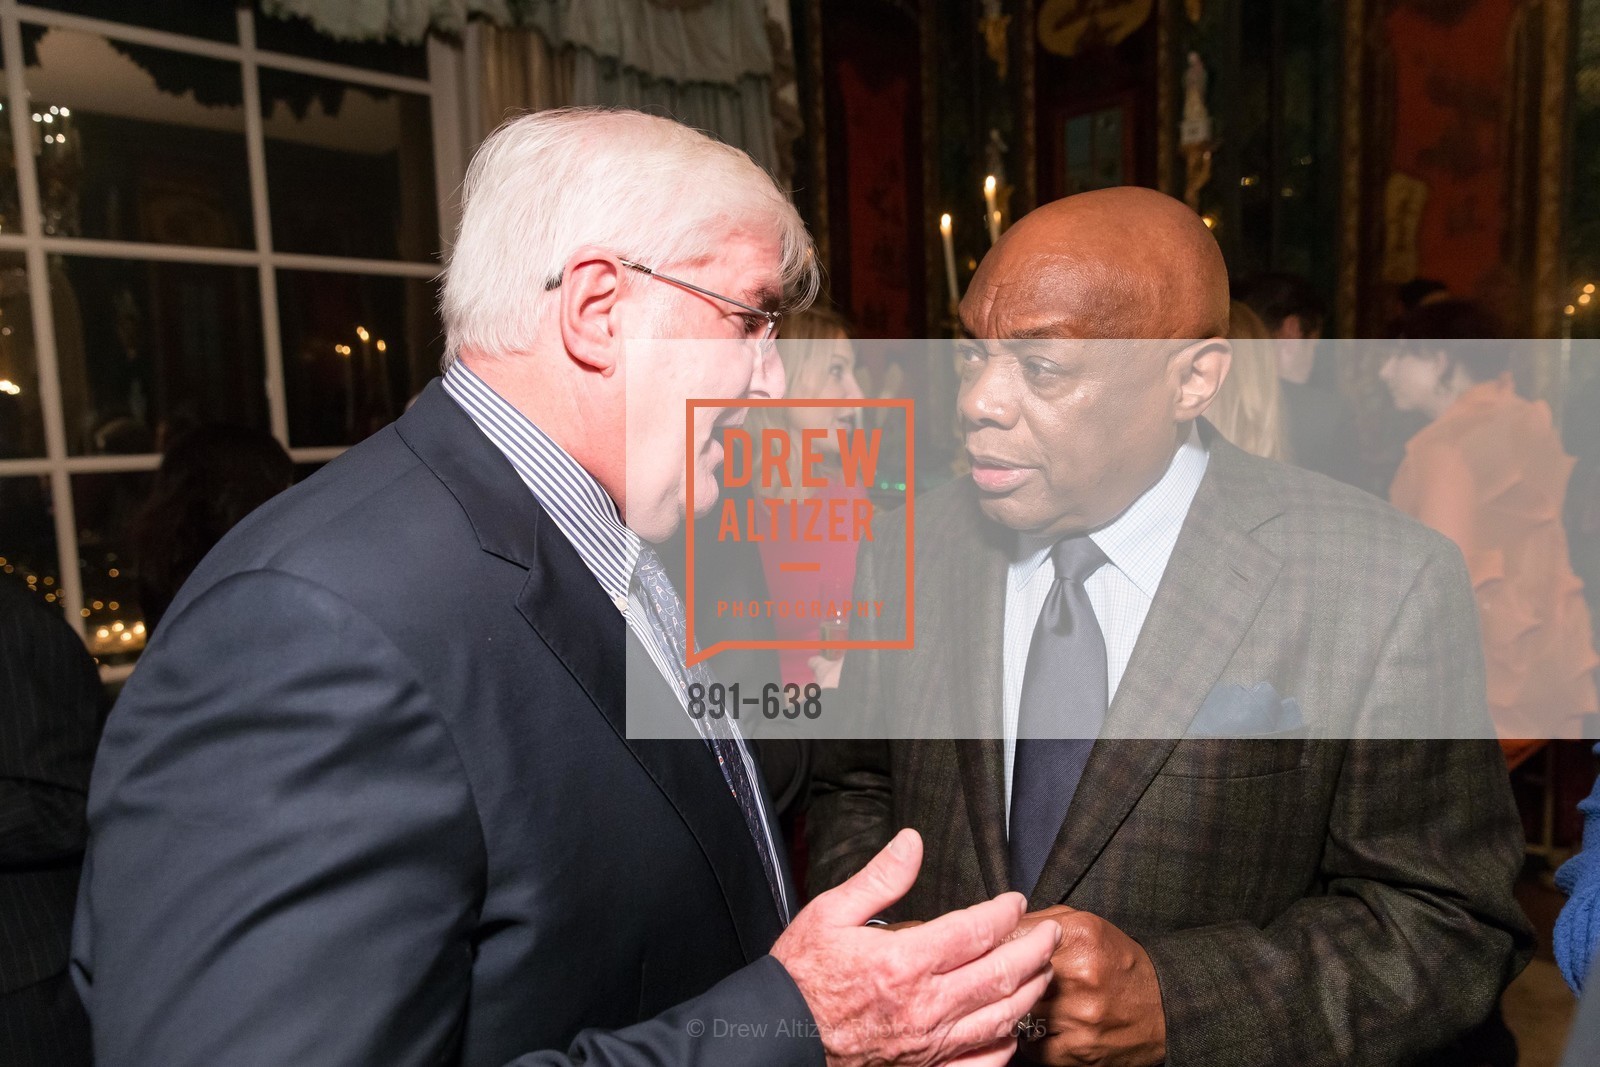 Ron Conway, Willie Brown, Photo #891-638